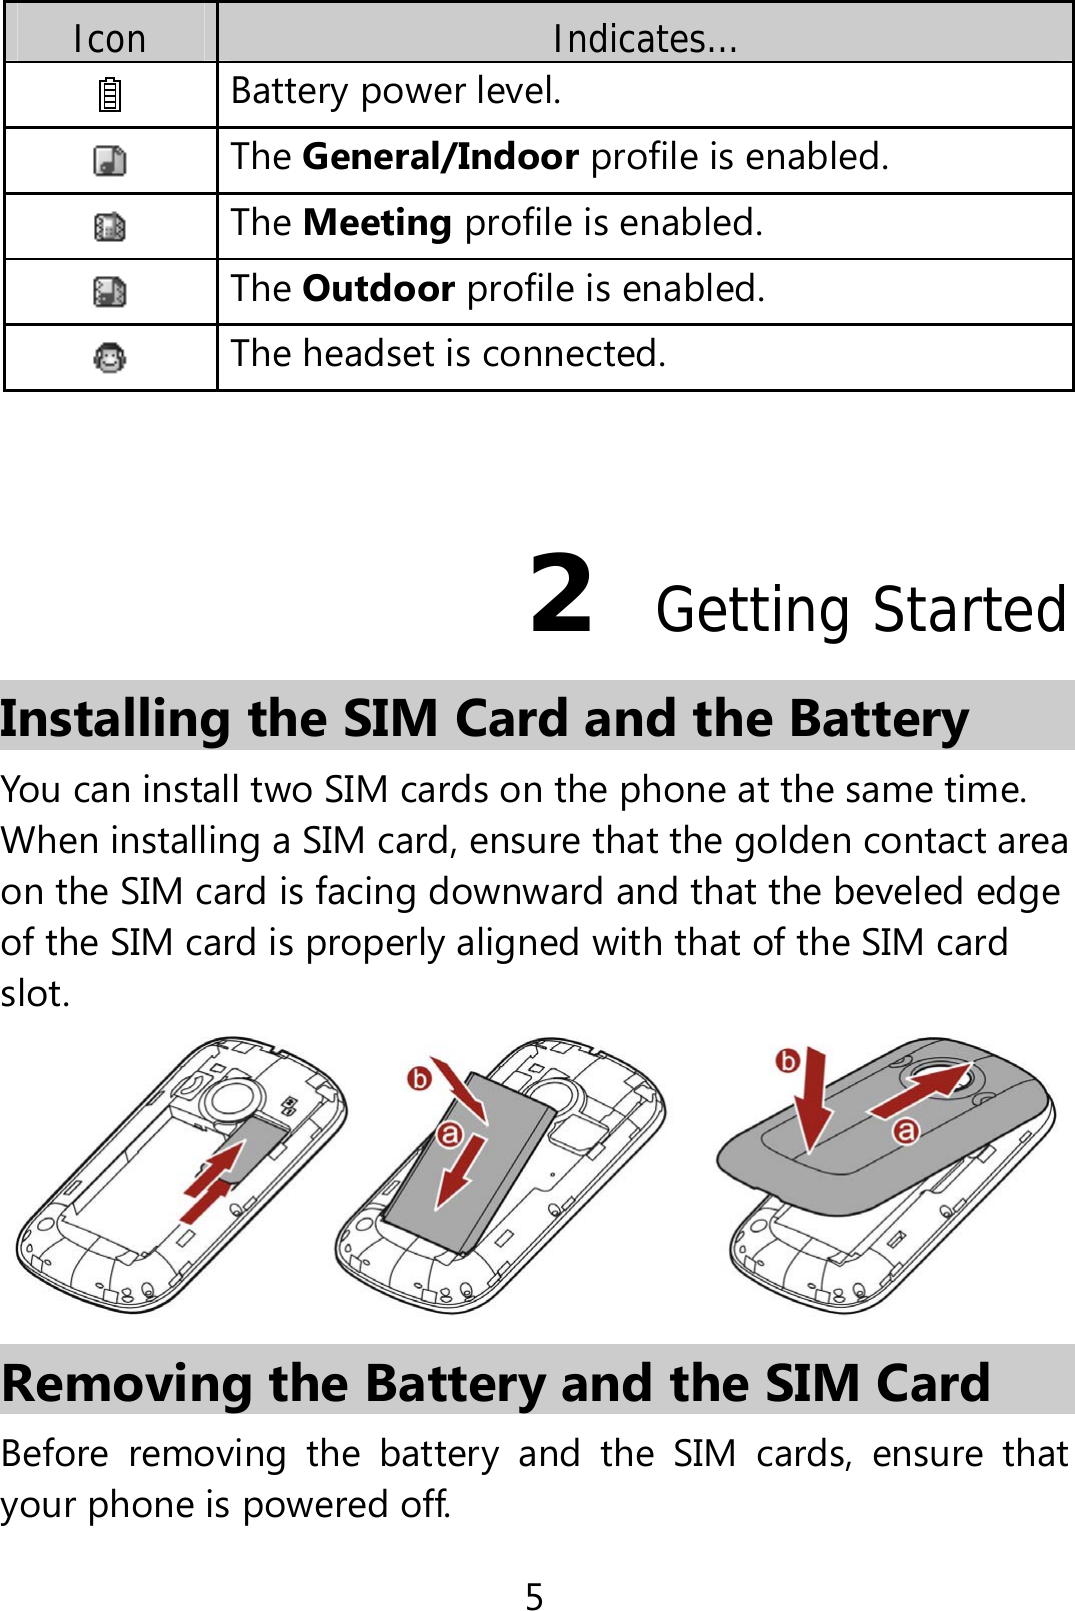 5 Icon  Indicates… Battery power level. The General/Indoor profile is enabled.  The Meeting profile is enabled. The Outdoor profile is enabled. The headset is connected. 2  Getting Started Installing the SIM Card and the Battery You can install two SIM cards on the phone at the same time. When installing a SIM card, ensure that the golden contact area on the SIM card is facing downward and that the beveled edge of the SIM card is properly aligned with that of the SIM card slot.  Removing the Battery and the SIM Card Before removing the battery and the SIM cards, ensure that your phone is powered off. 